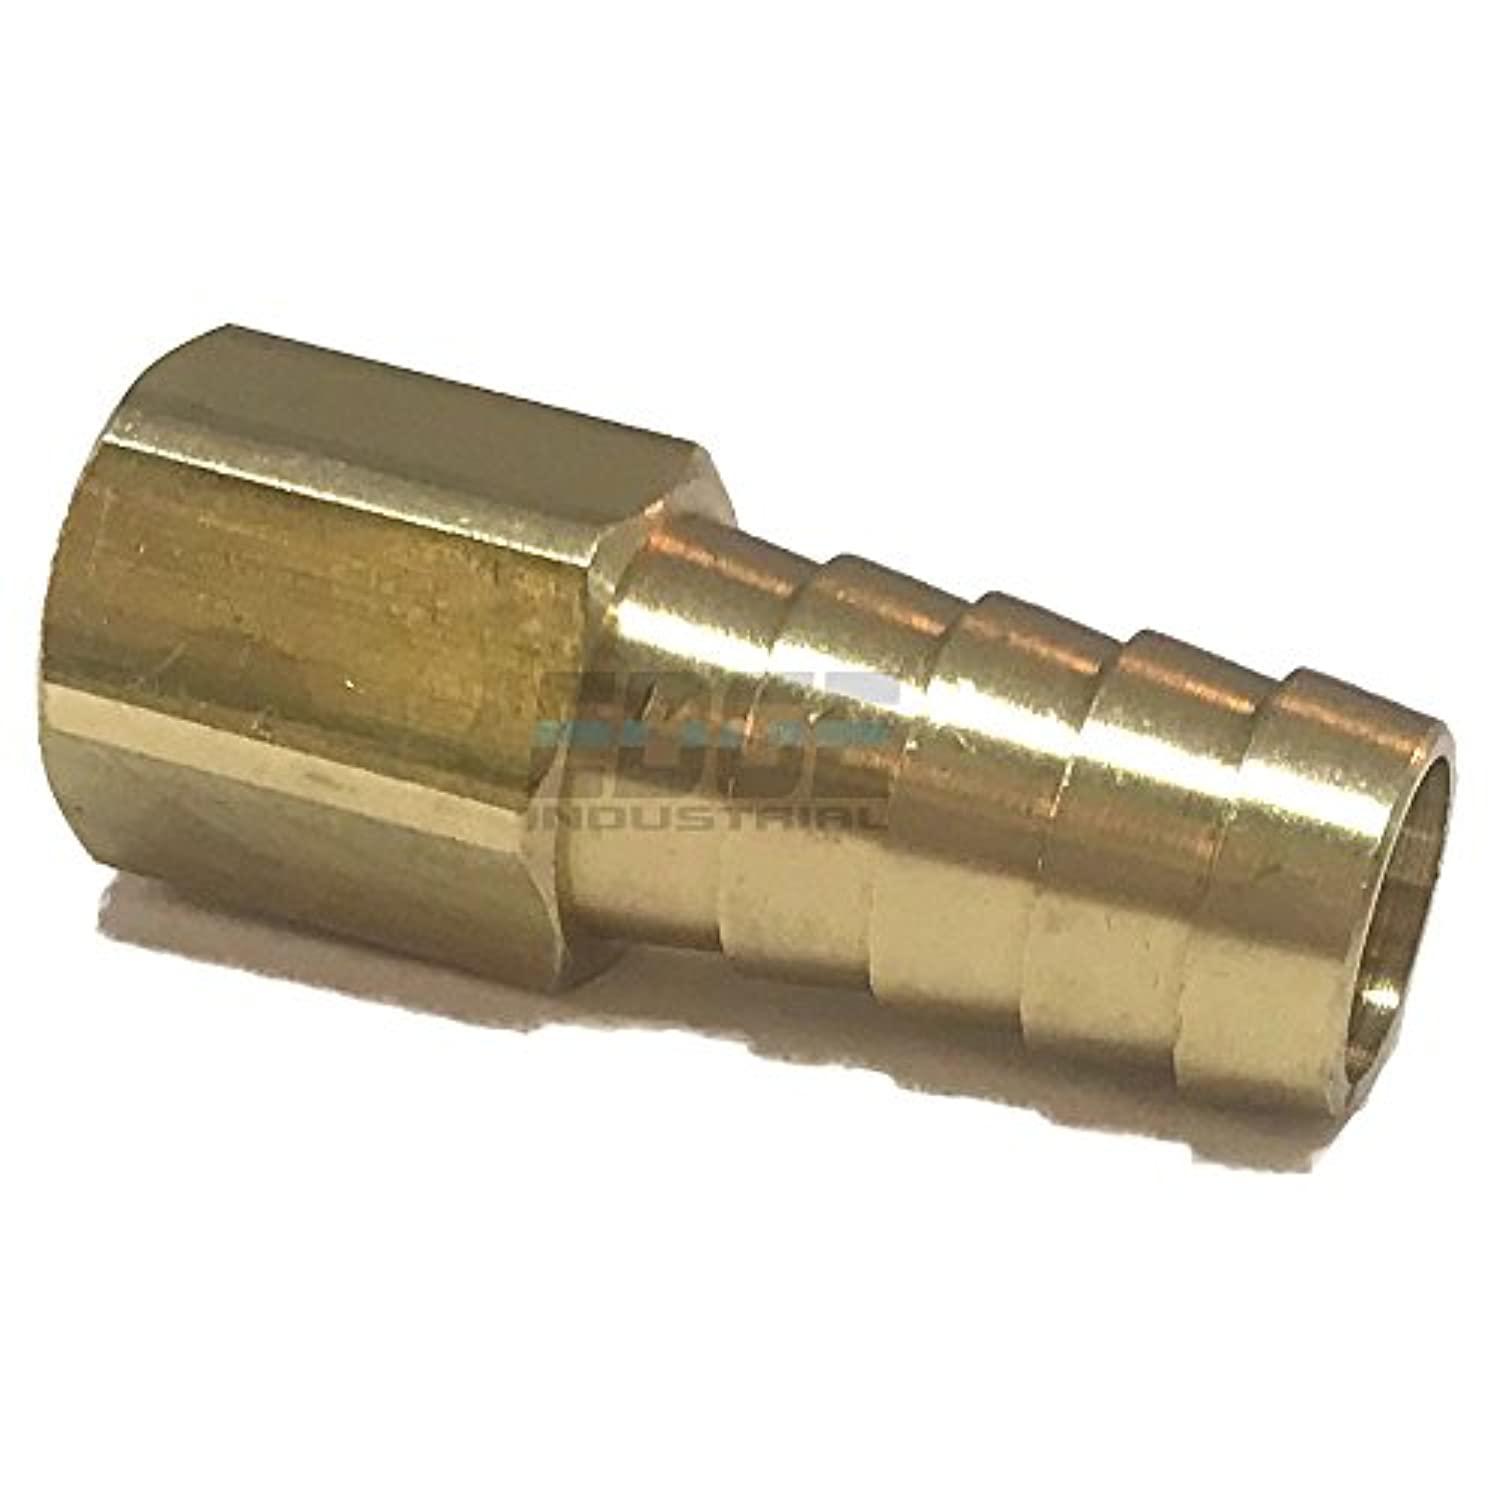 edge industrial 1/2" hose id to 1/4" female npt fnpt straight brass fitting fuel / air / water / oil / gas / wog (qty 01)